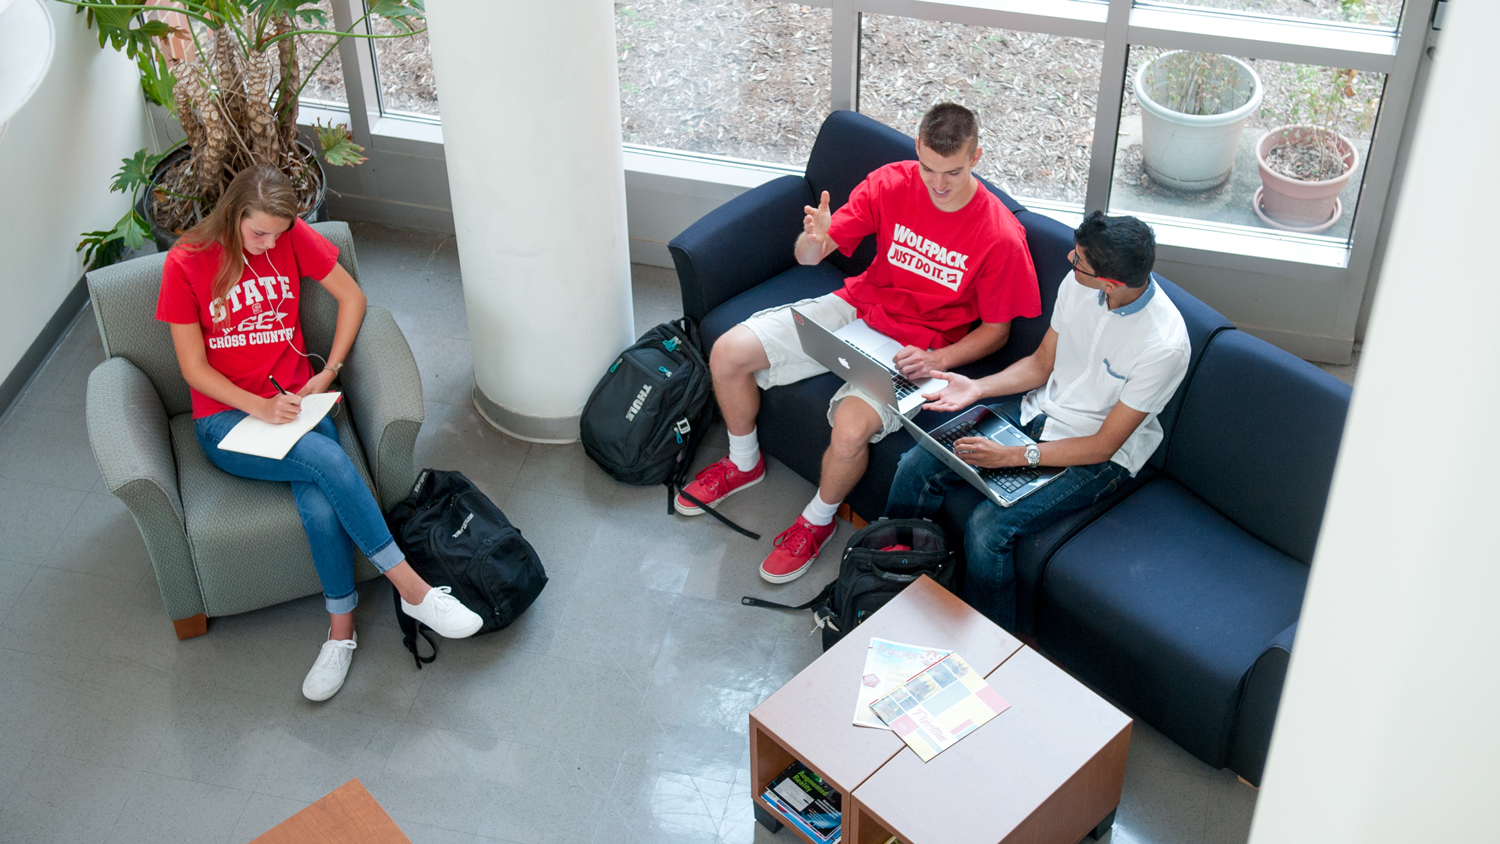 Students in the lounge - Admissions - College of Natural Resources at NC State University